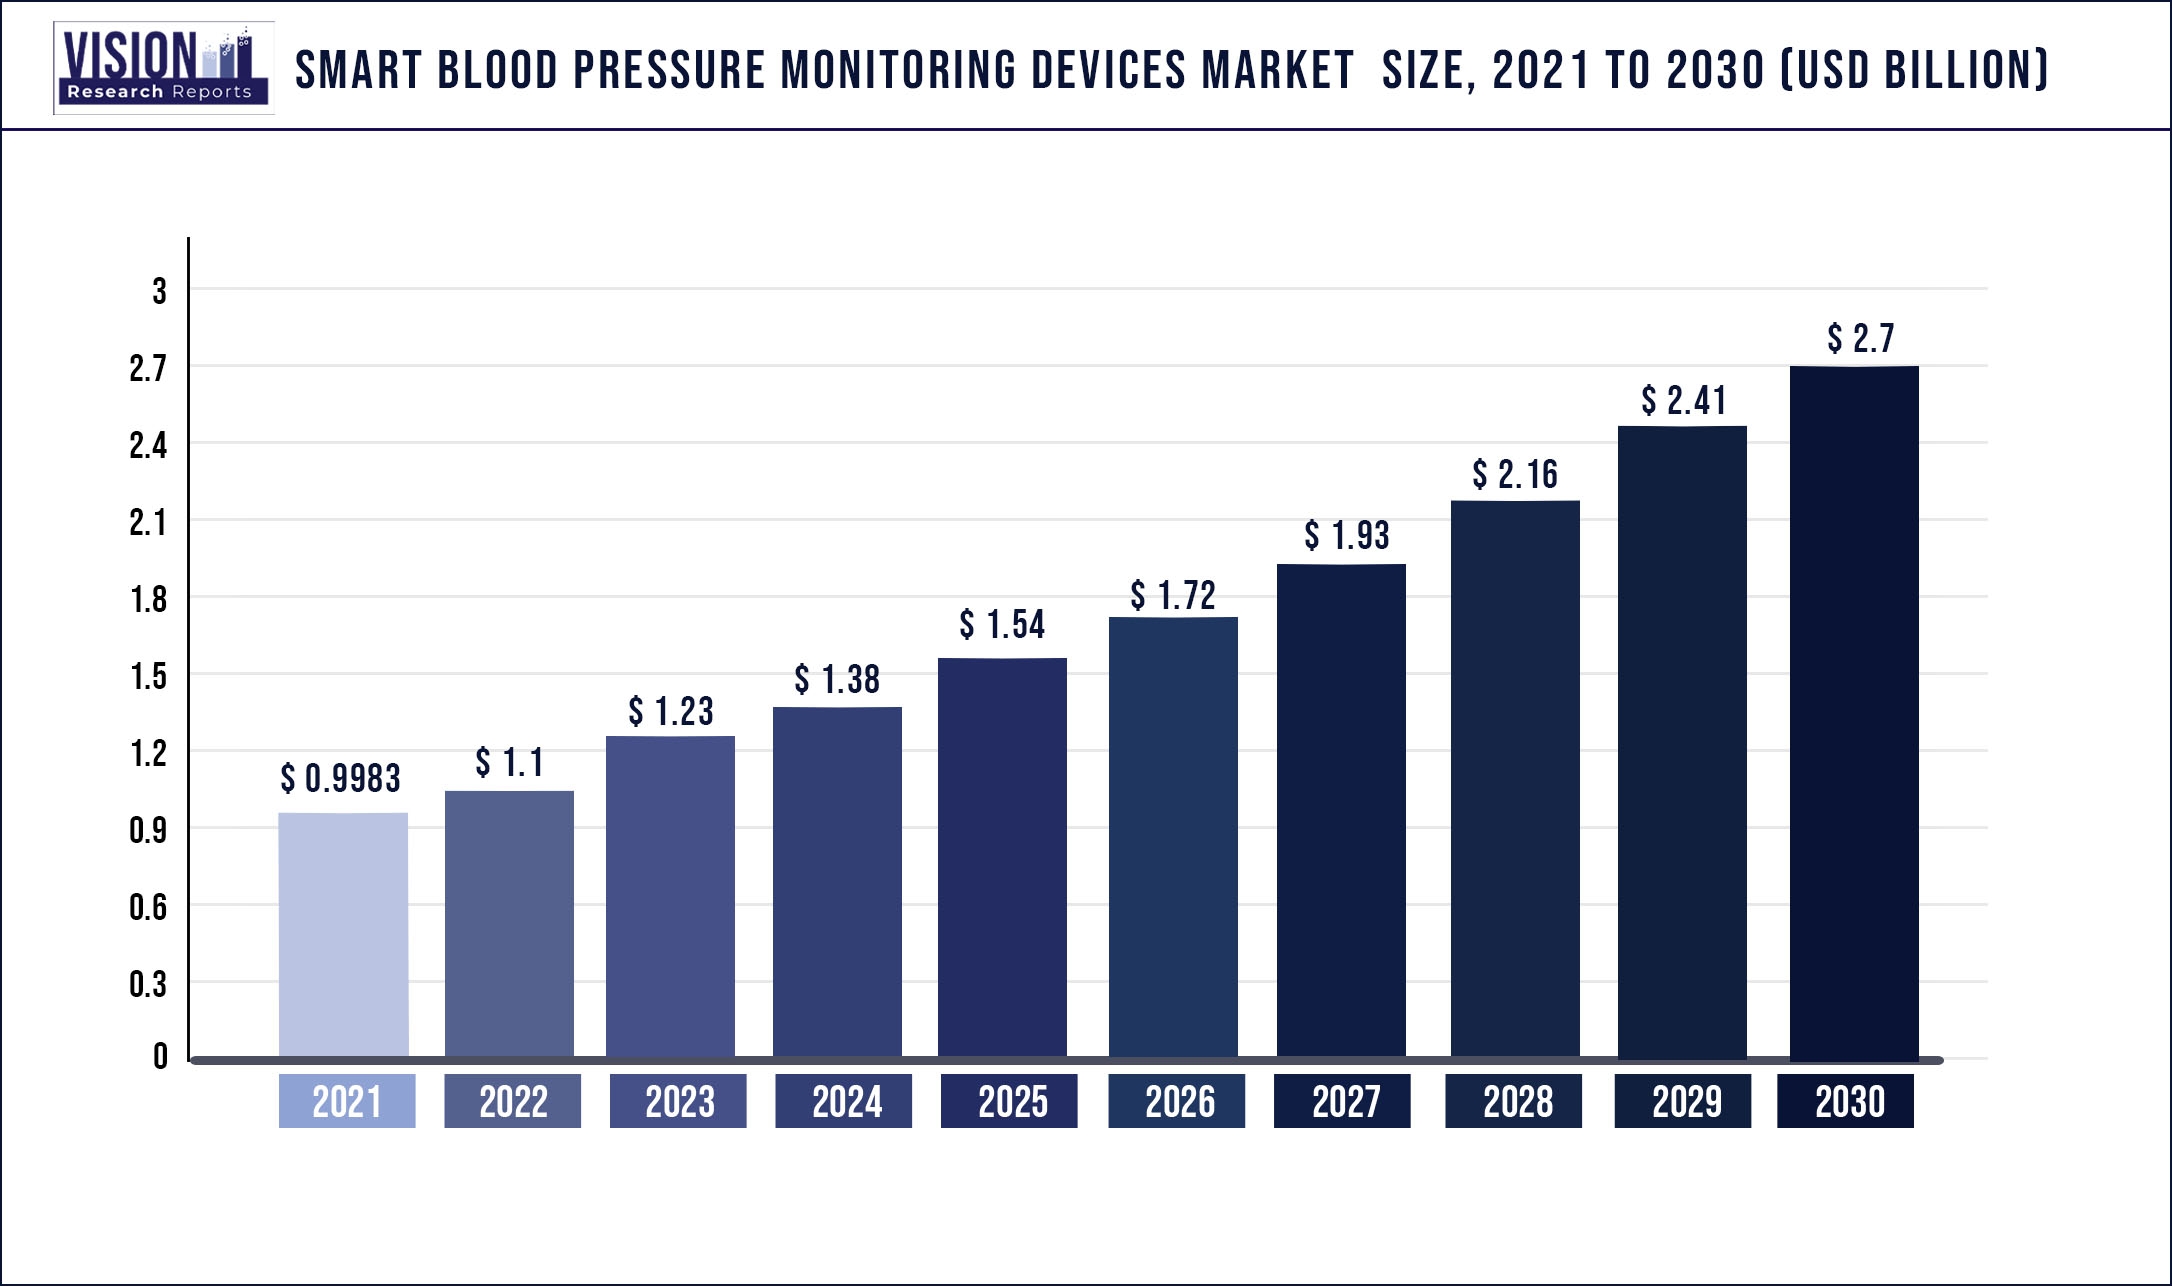 Smart Blood Pressure Monitoring Devices Market Size 2021 to 2030